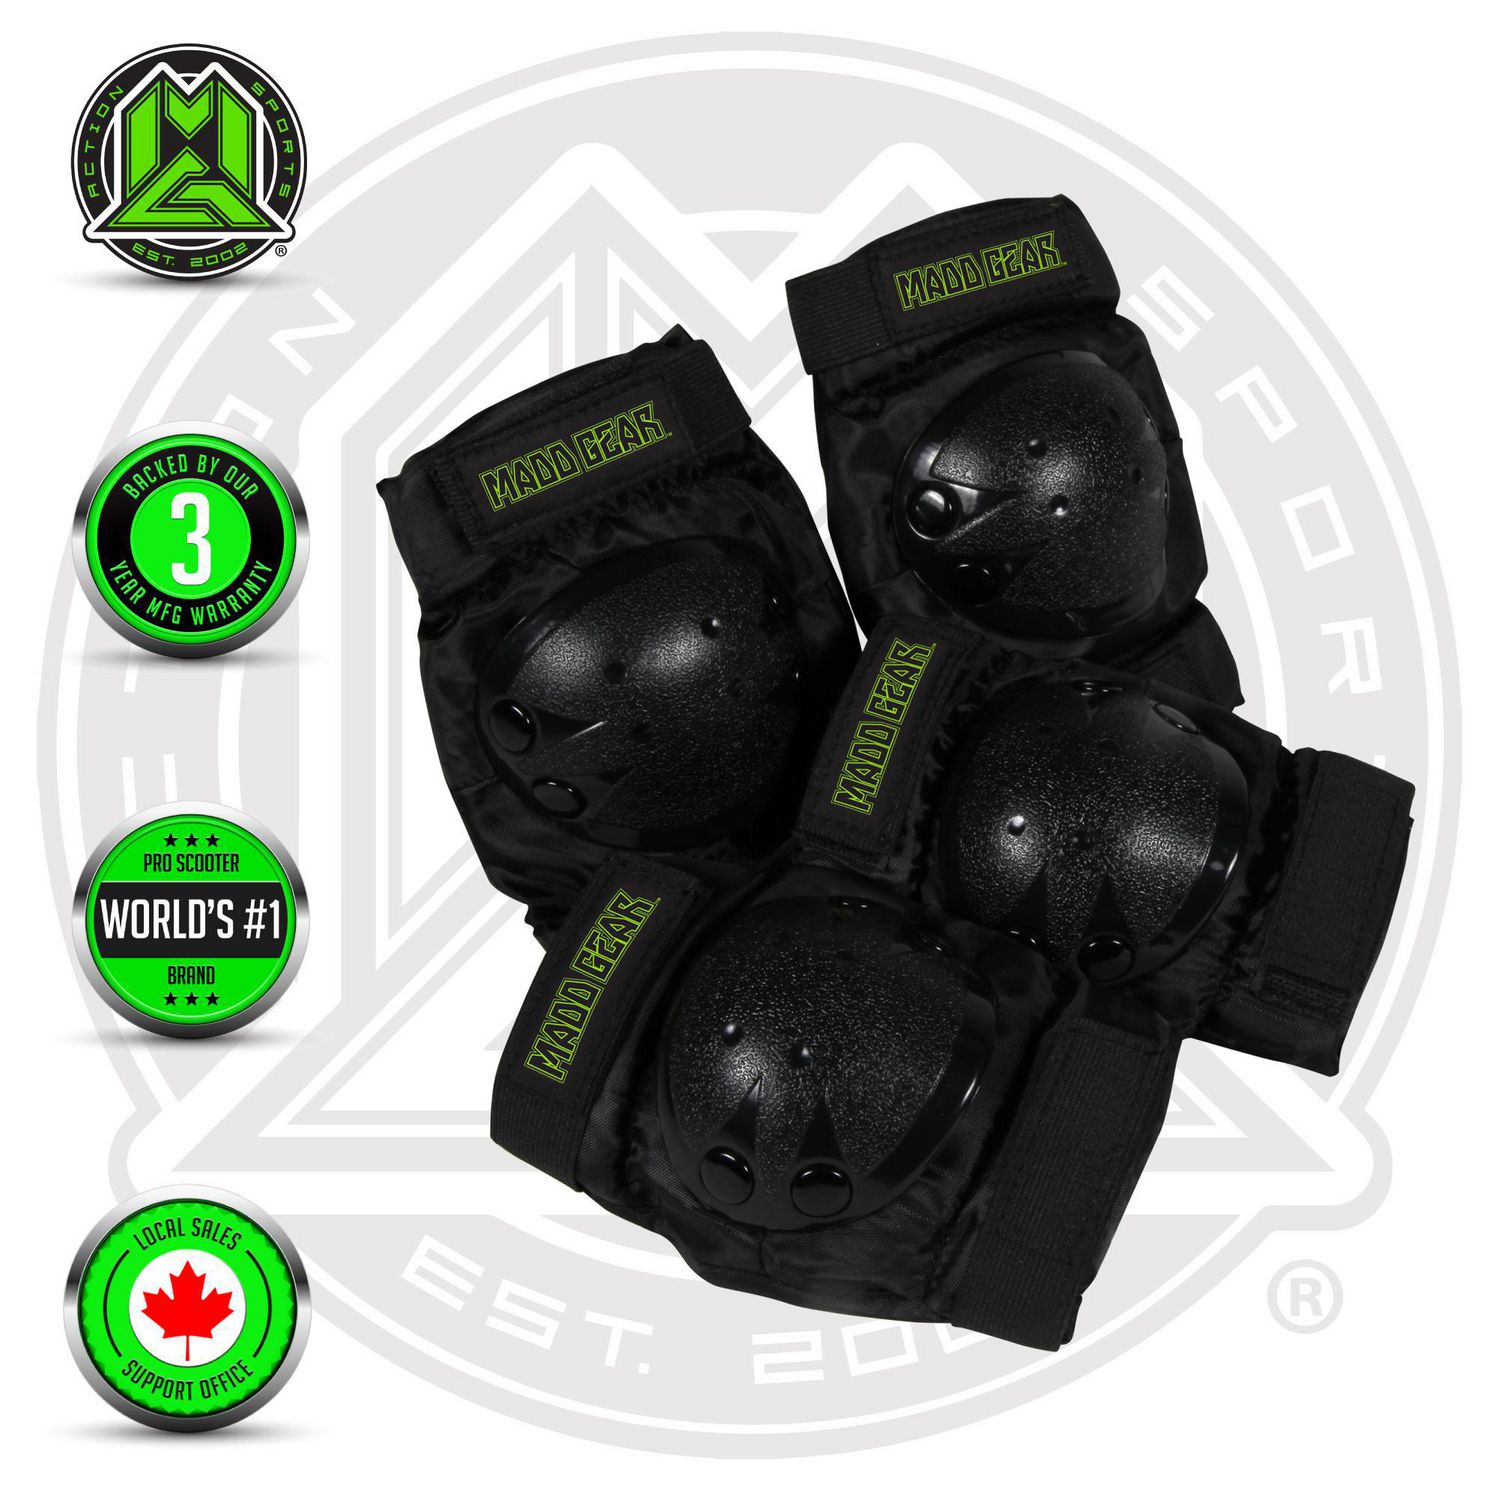 Details about   Madd Gear Carve Protective Knee & Elbow Pads Junior Size Includes Sticker Pack 